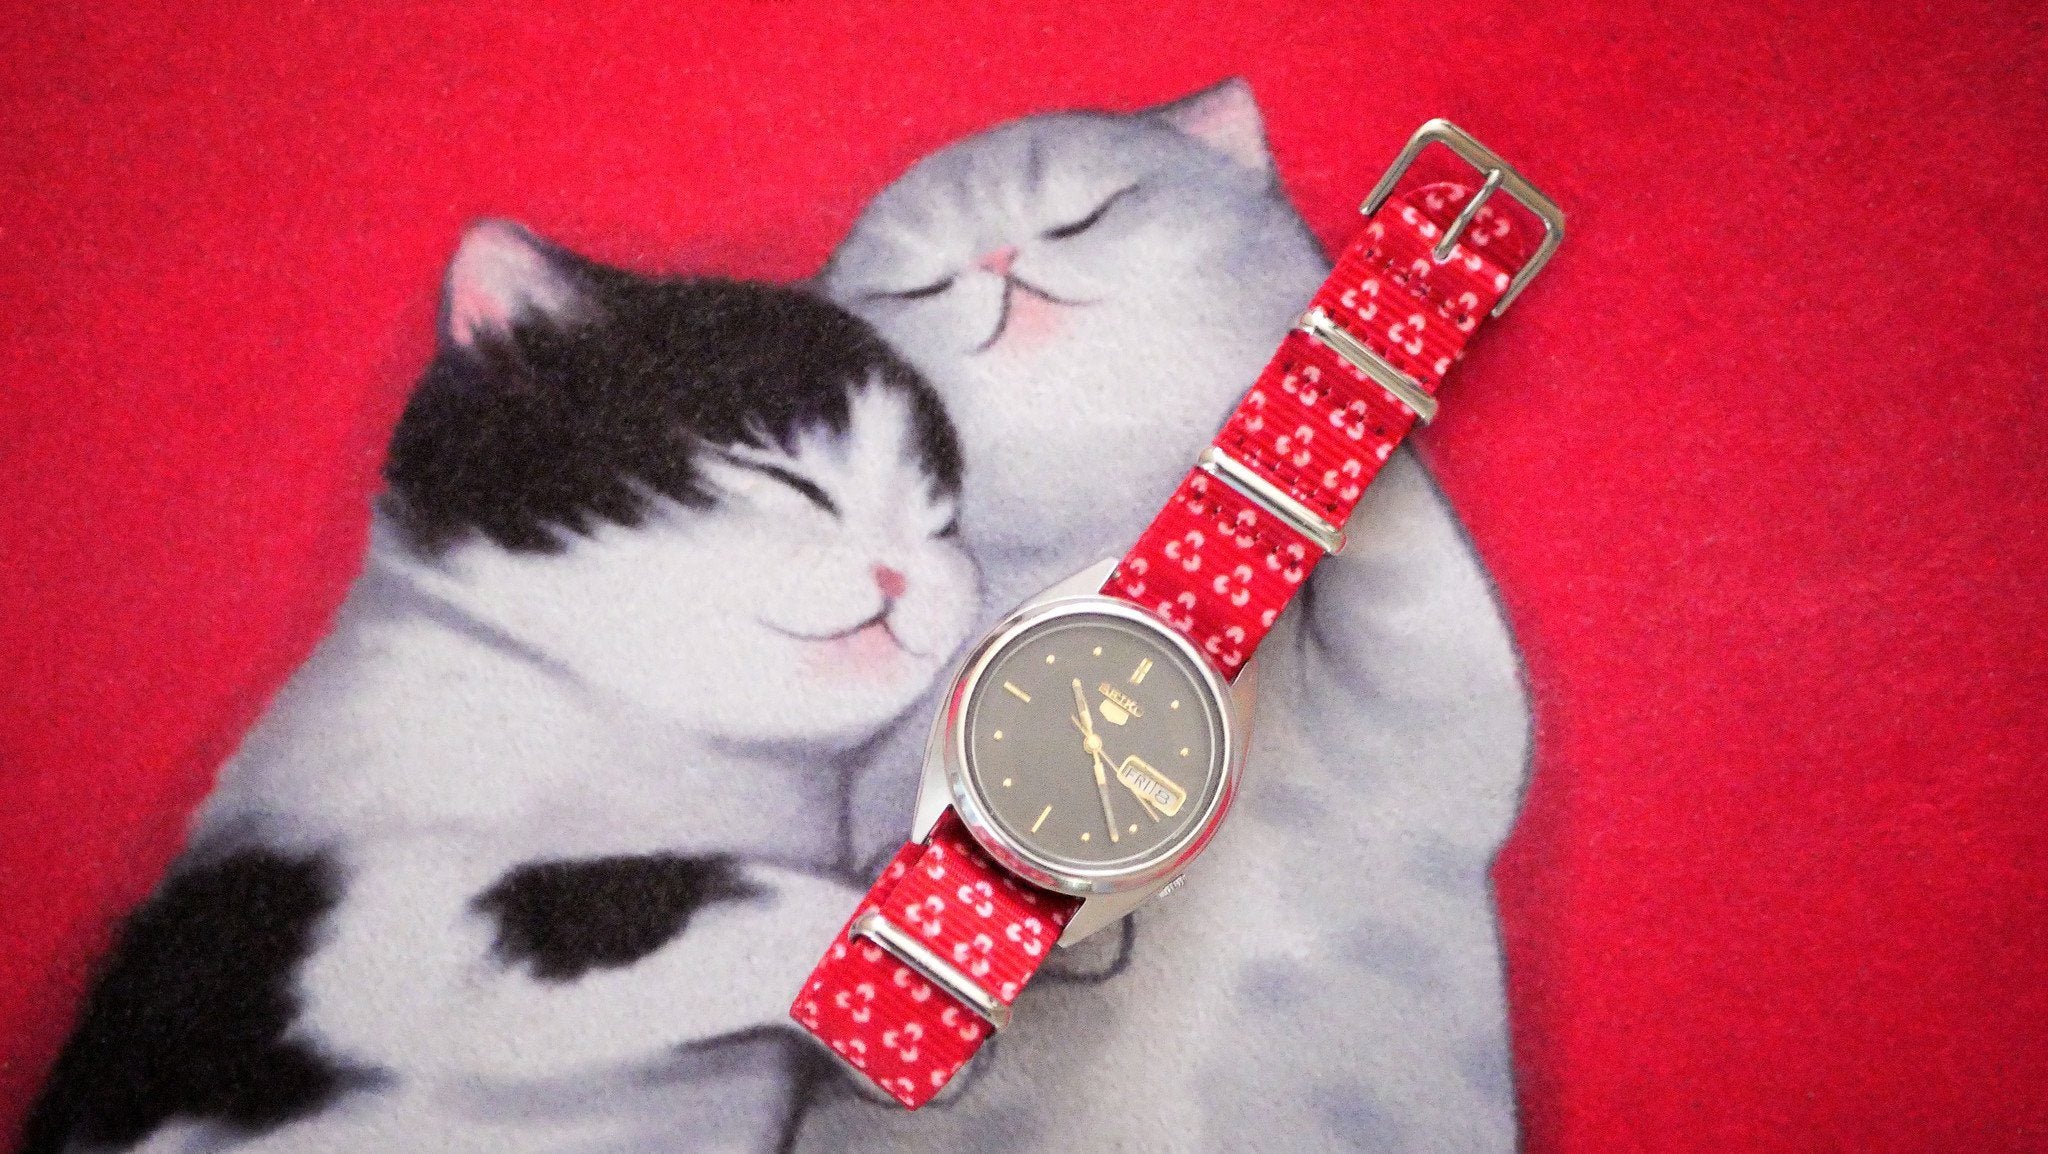 A pair of cats loving our strap on vintage Seiko 5